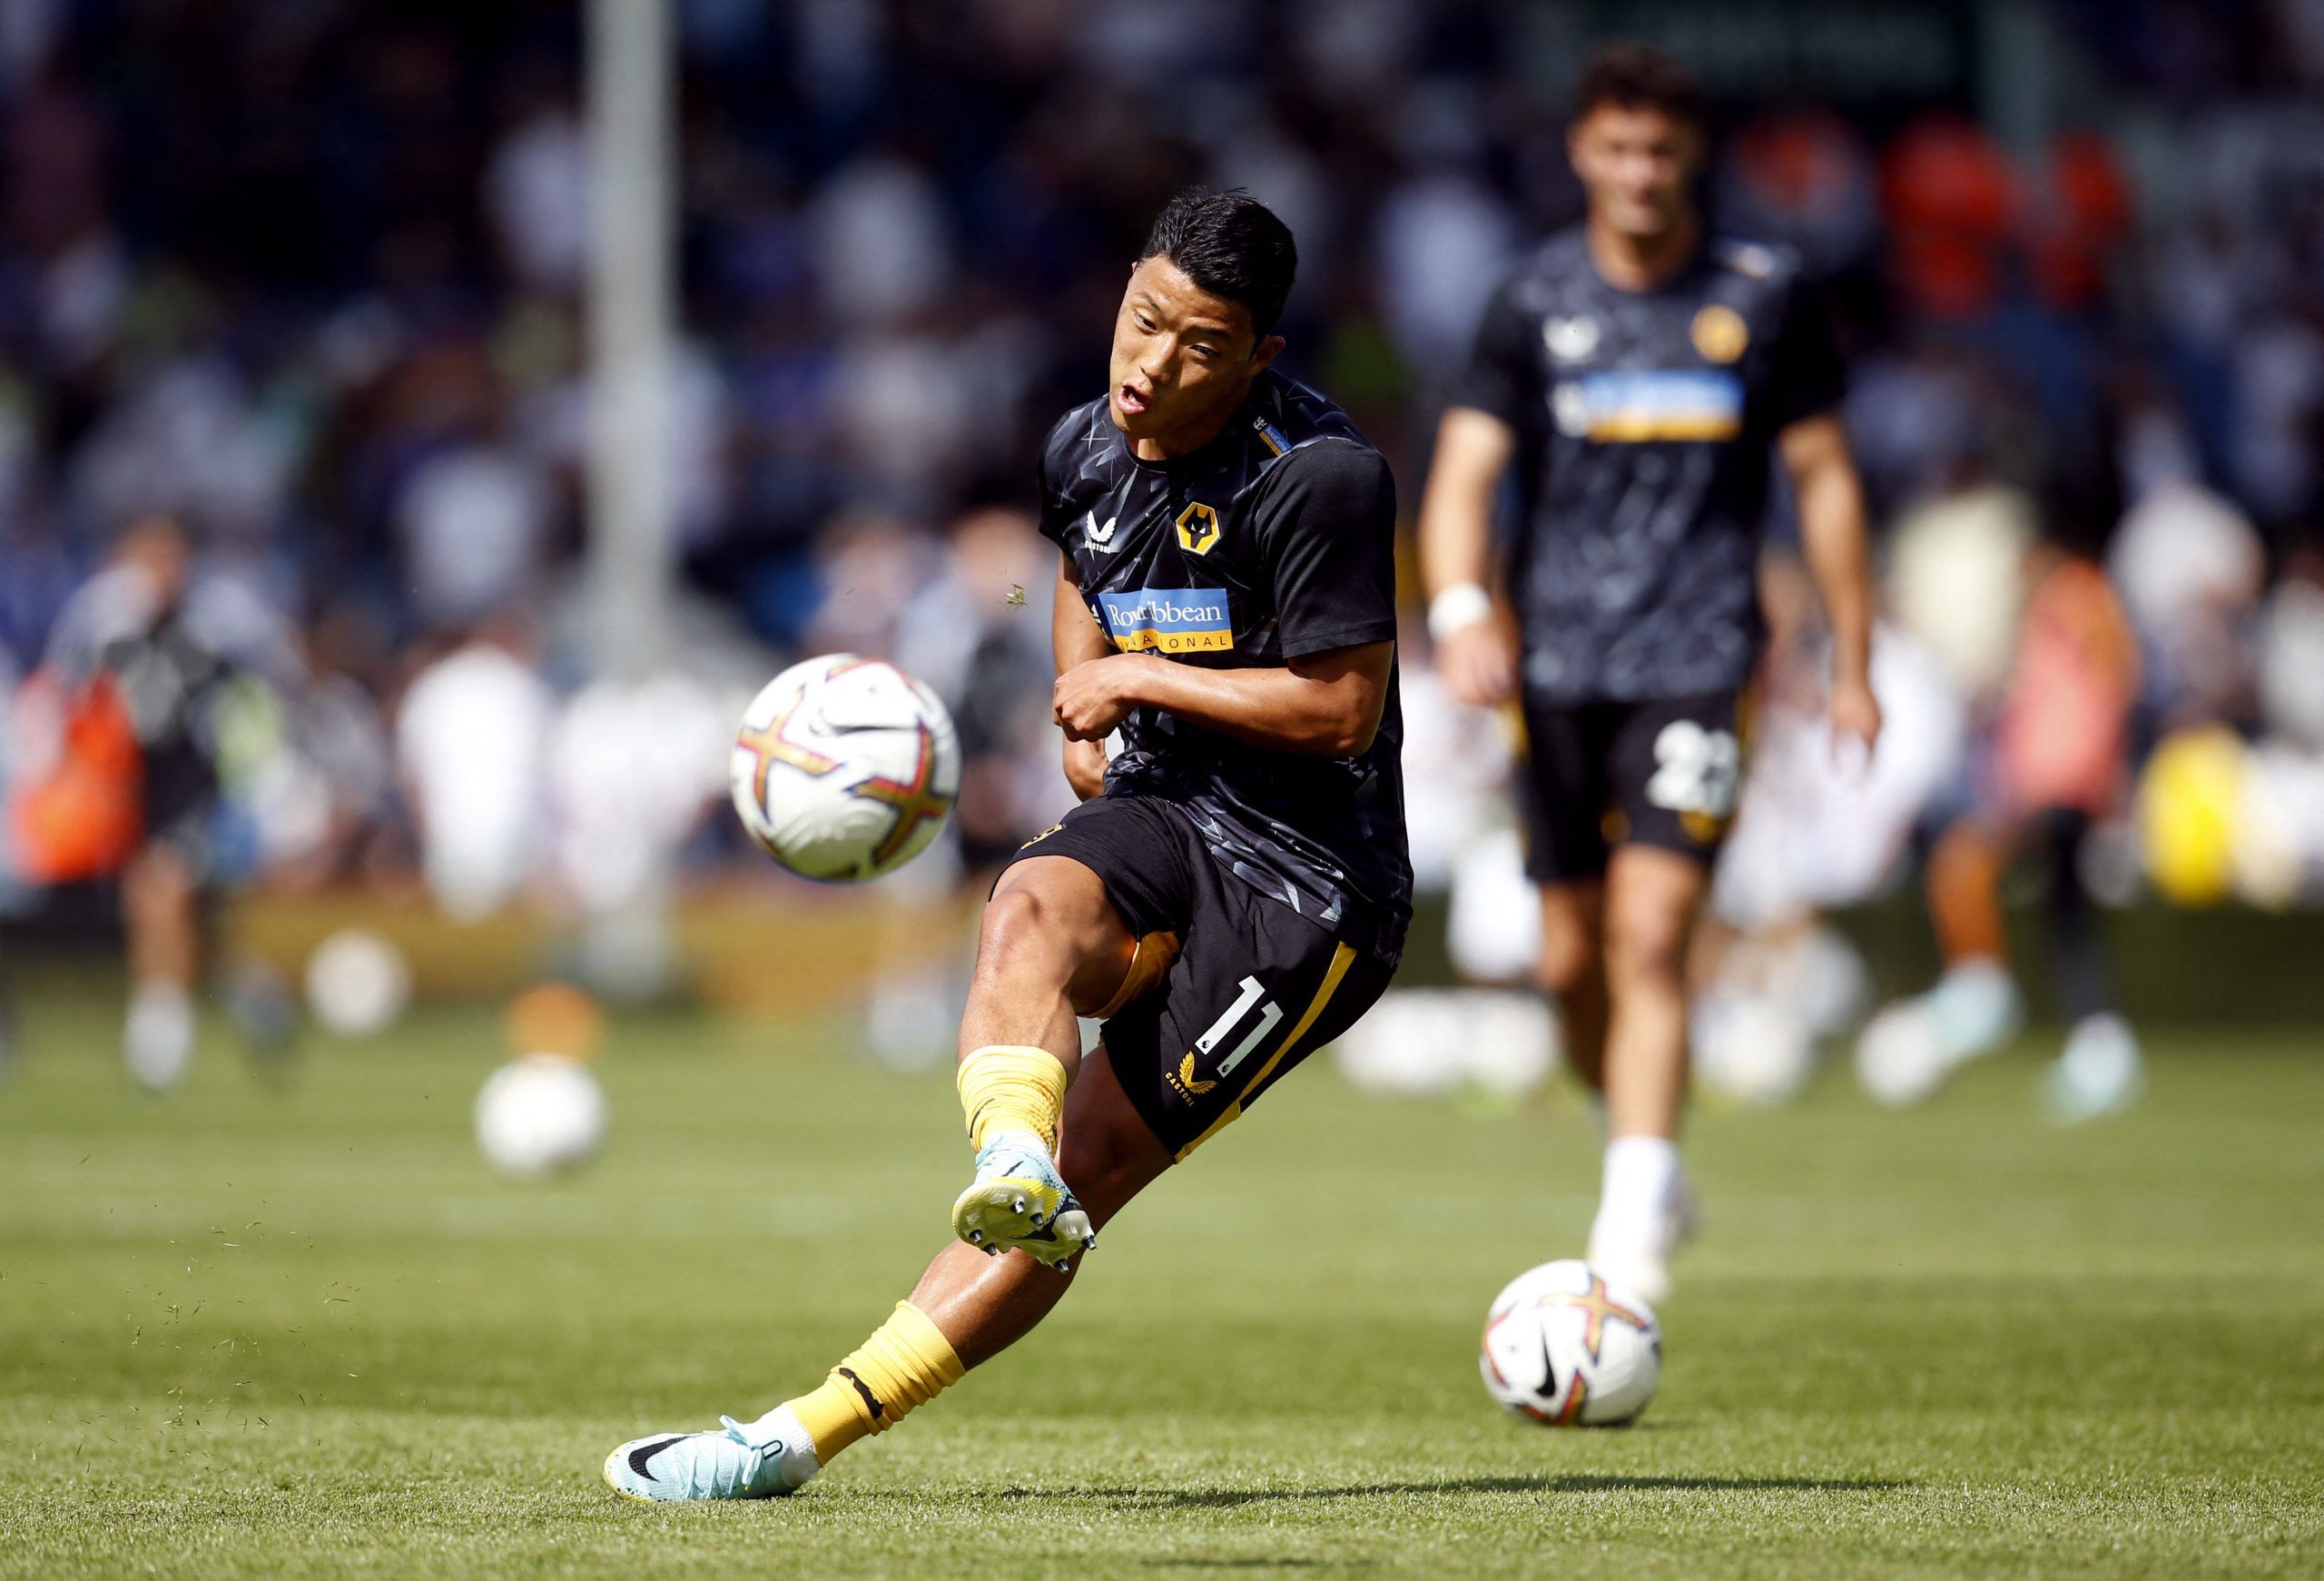 Hwang Hee-chan during the warm up before the match vs Leeds